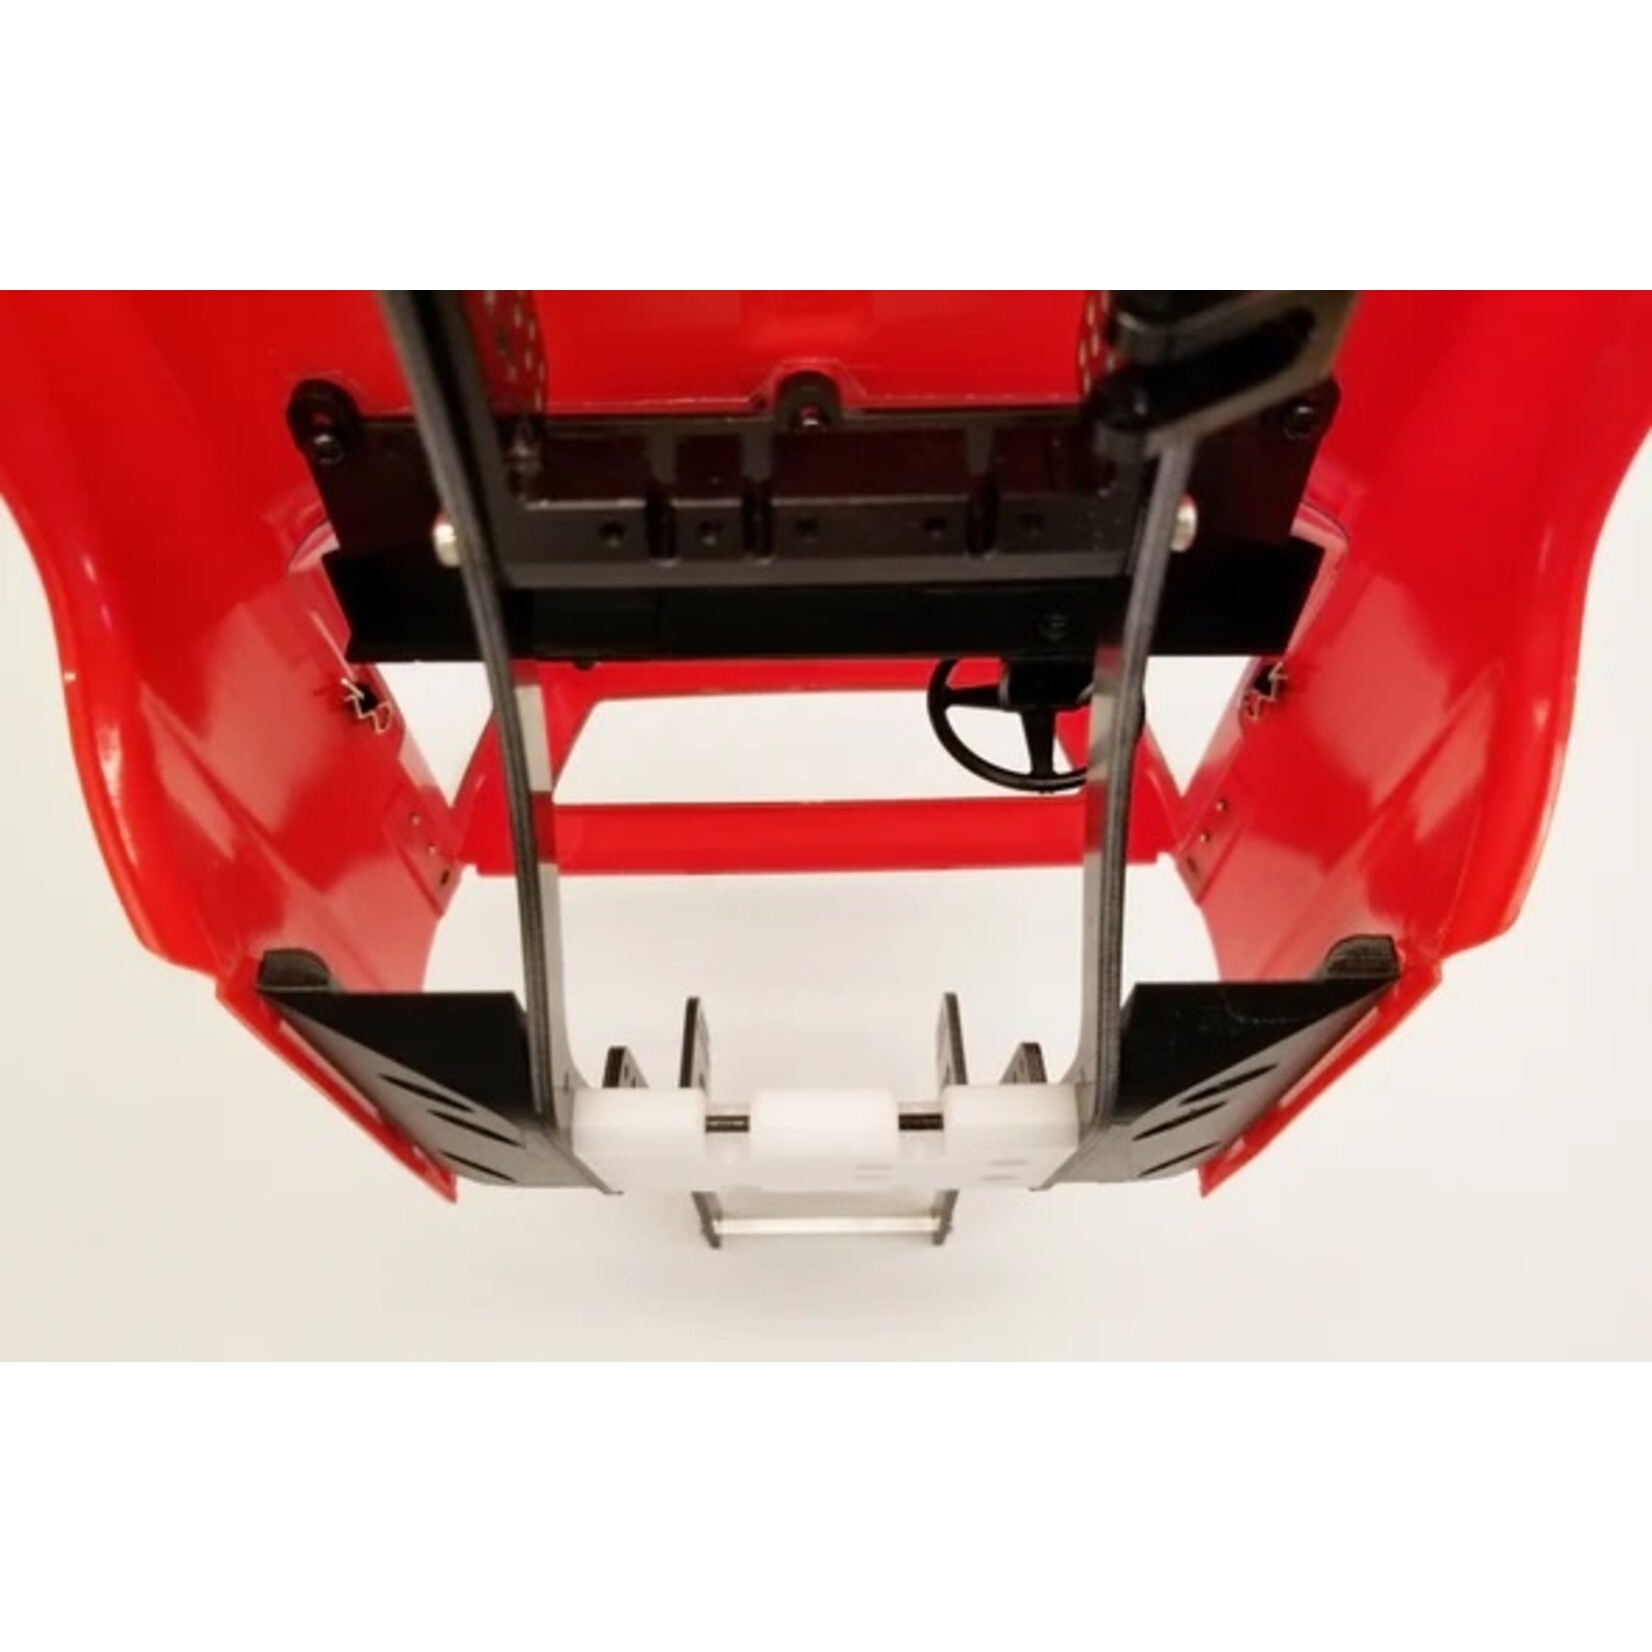 Team G-Speed GSPEED Chassis TGH-V3 Hard Body Mount Sliders #9090